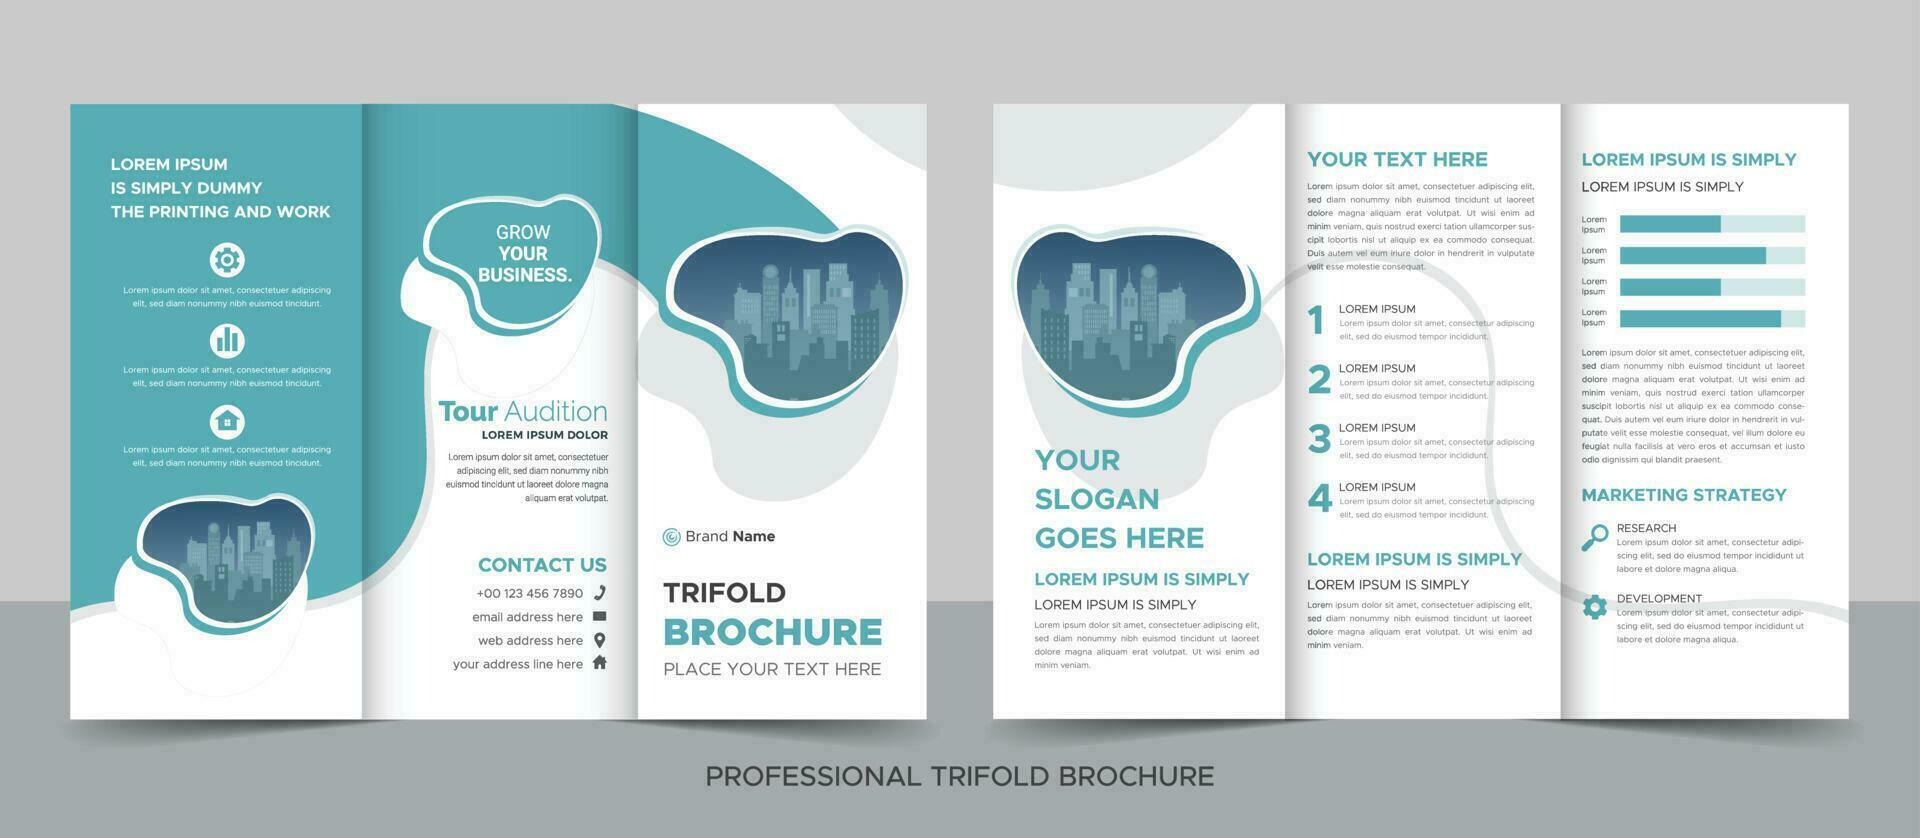 Trifold Brochure Design Template for Your Company, Corporate, Business, Advertising, Marketing, Agency, and Internet Business. vector